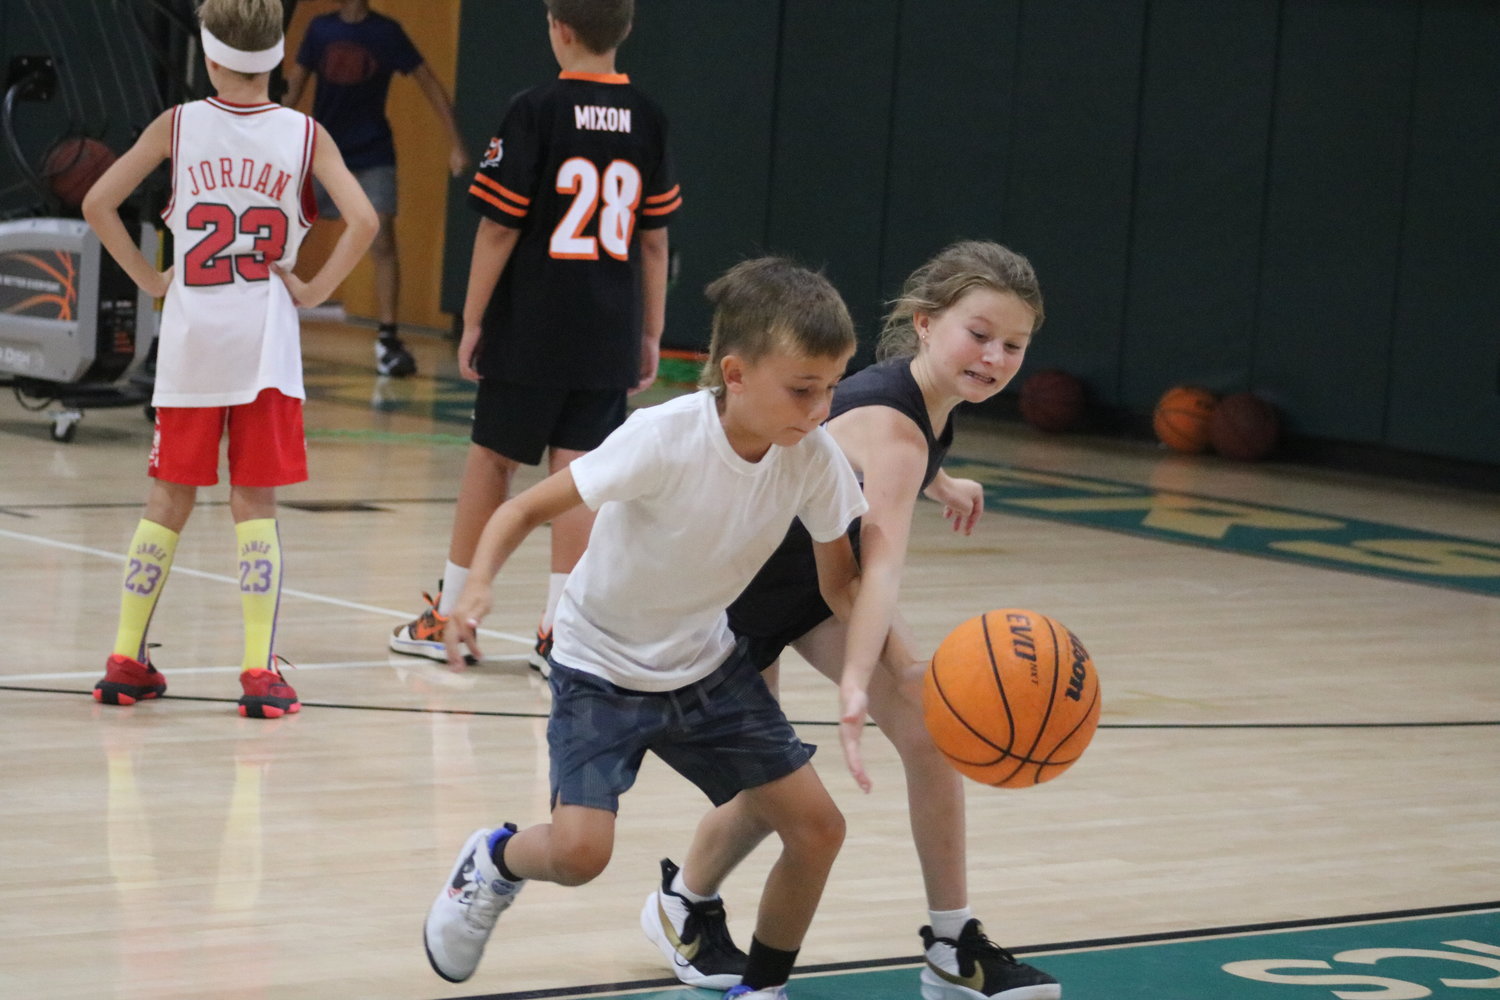 Boys and girls of all ages take part in the camp.